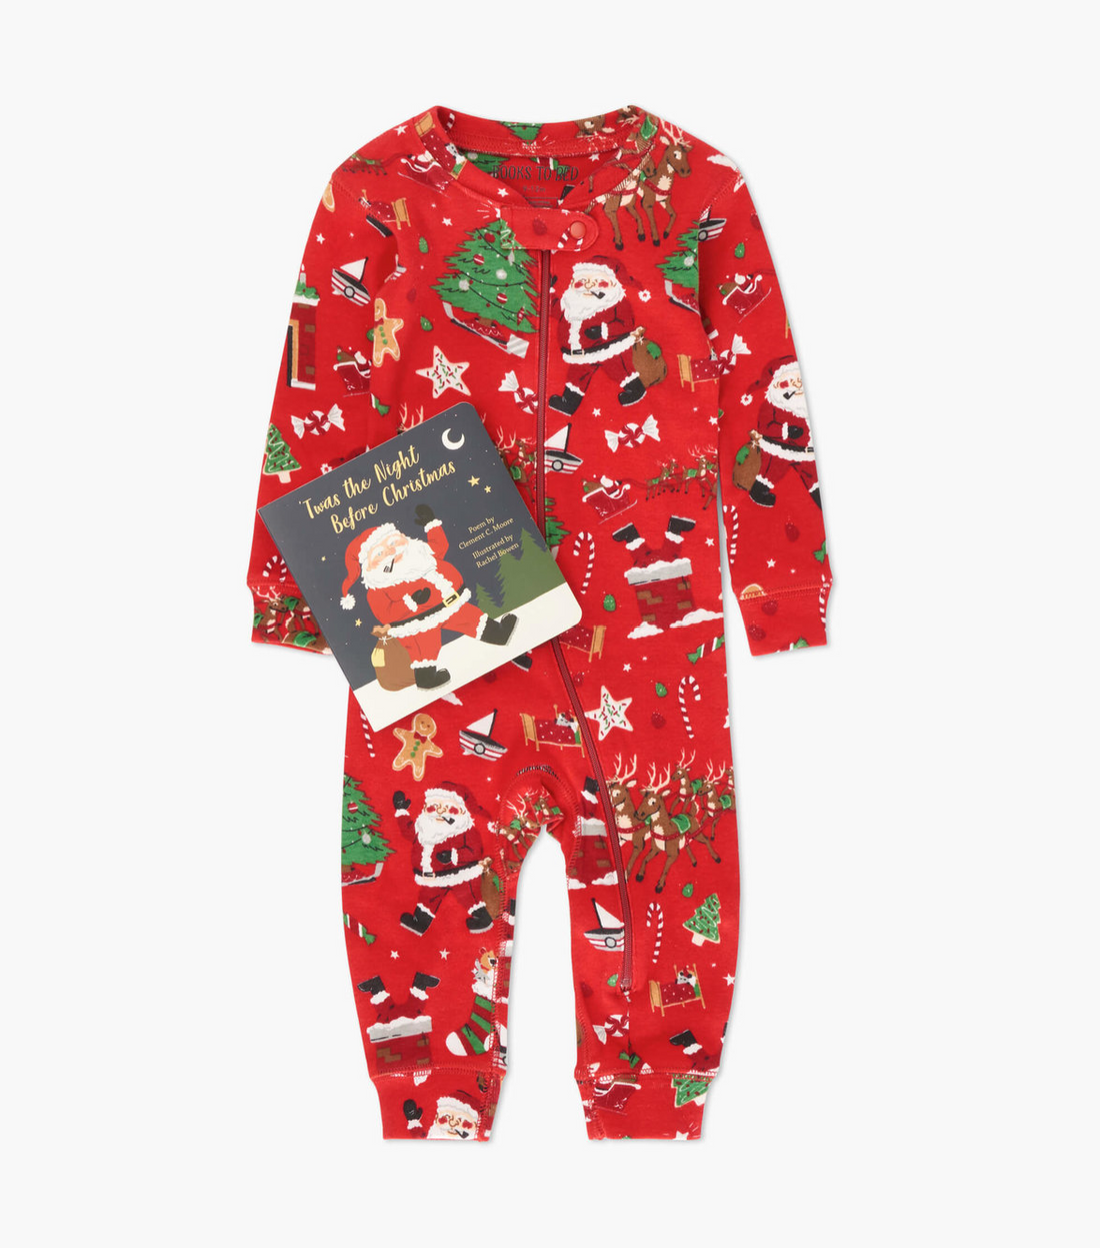 Twas The Night Before Christmas Book and Infant Coverall